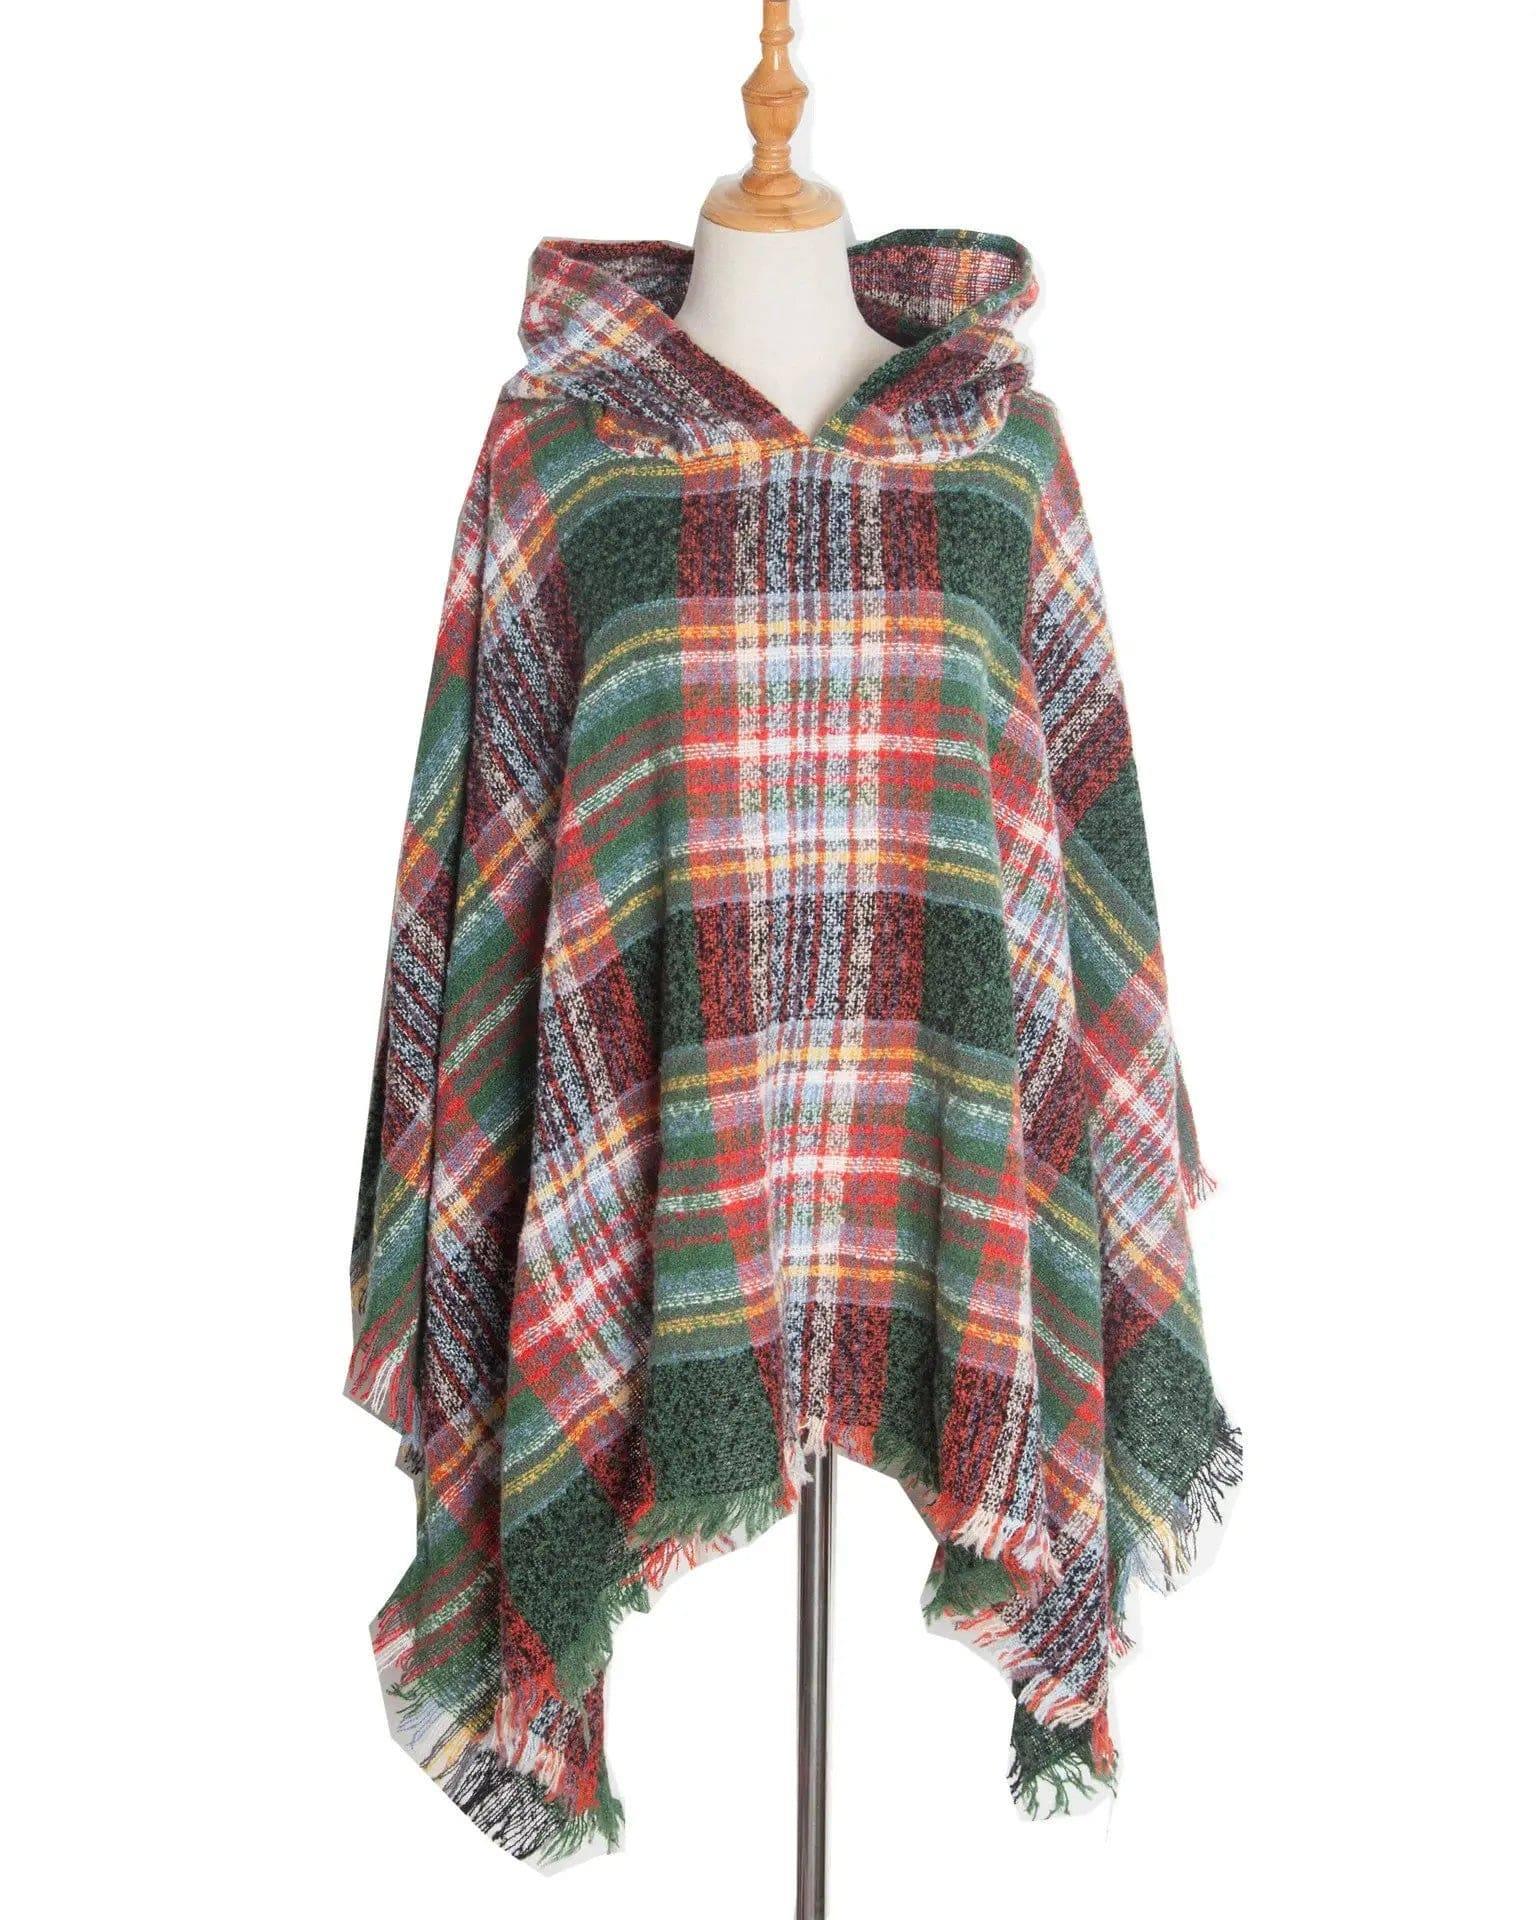 Spring Autumn And Winter Plaid Ribbon Cap Cape And Shawl-DP7 02 Green-27